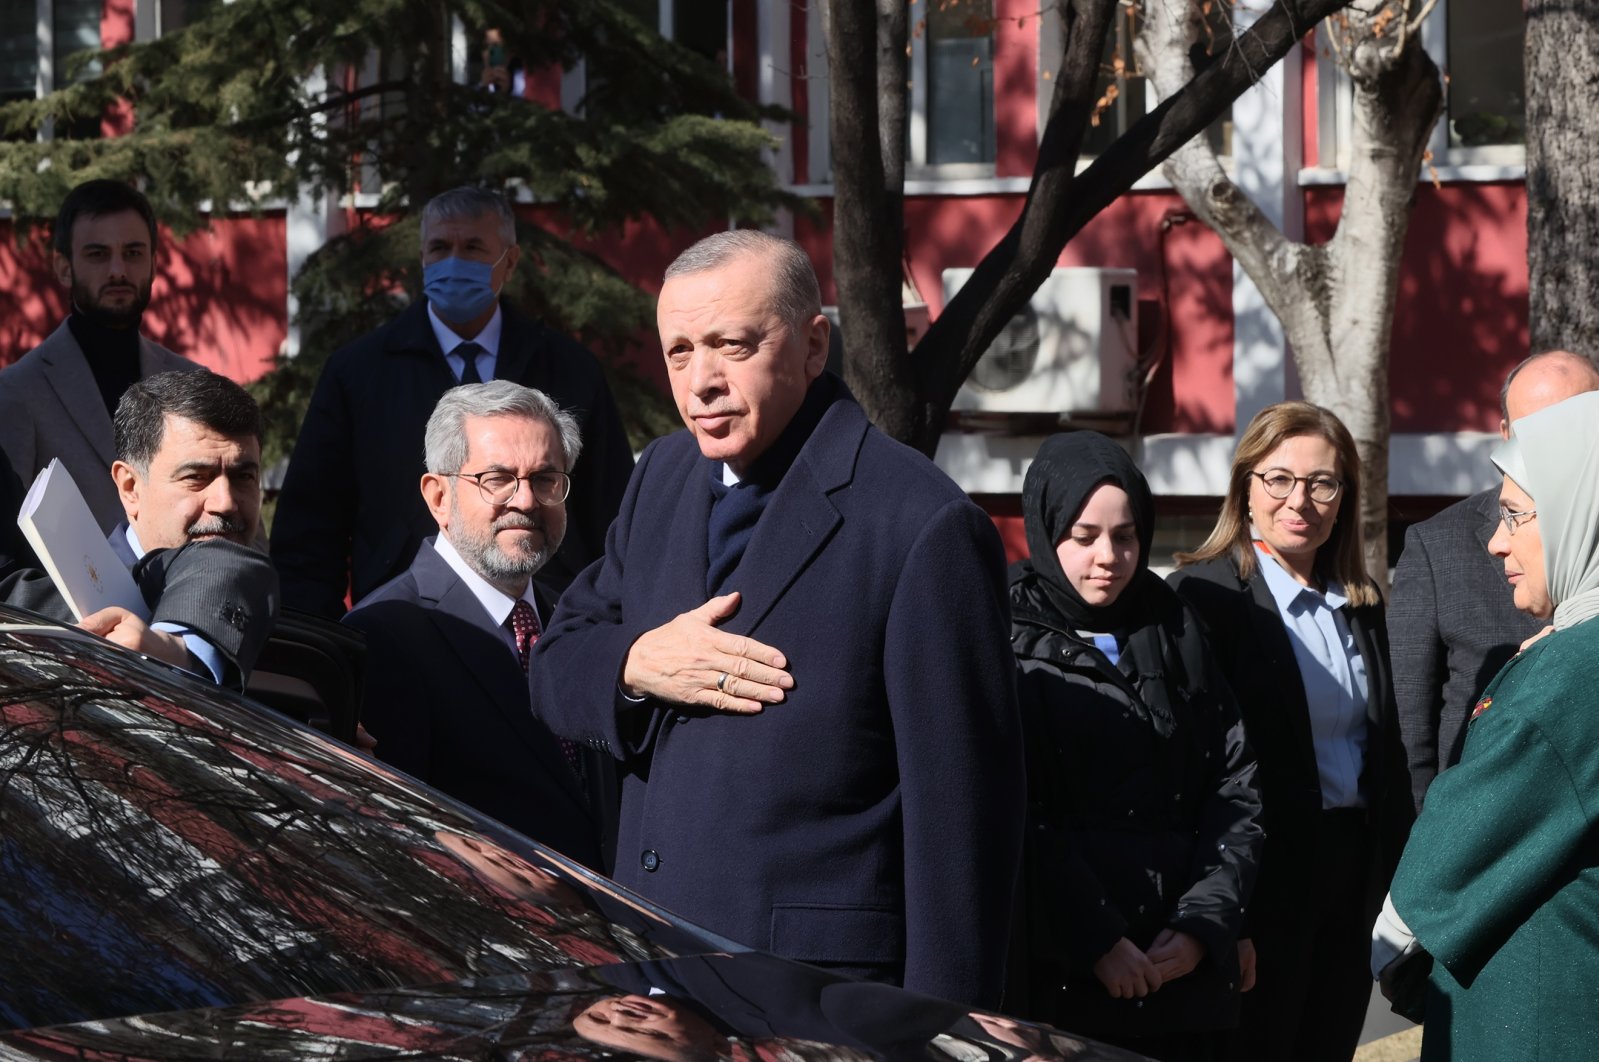 President Recep Tayyip Erdoğan and first lady Emine Erdoğan greet citizens as they arrive at Ankara University Children’s Hospital campus to visit a teenage girl who was rescued from the rubble 248 hours after the deadly earthquakes in the southeast, Ankara, Türkiye, Feb. 22, 2023. (AA Photo)